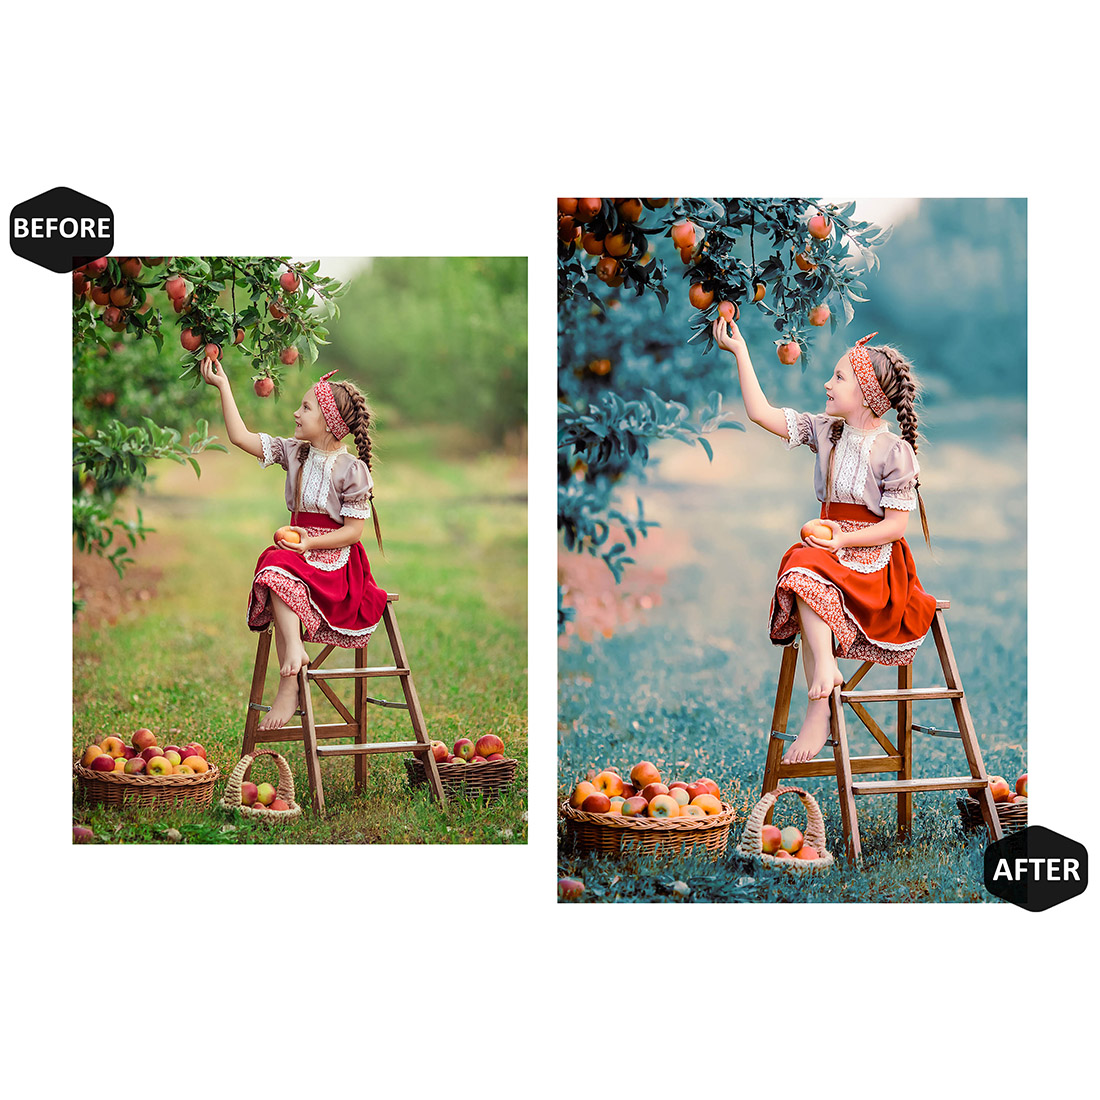 12 Photoshop Actions, Earth Angels Ps Action, Children ACR Preset, Bluish Ps Filter, Portrait And Lifestyle Theme For Instagram, Blogger preview image.